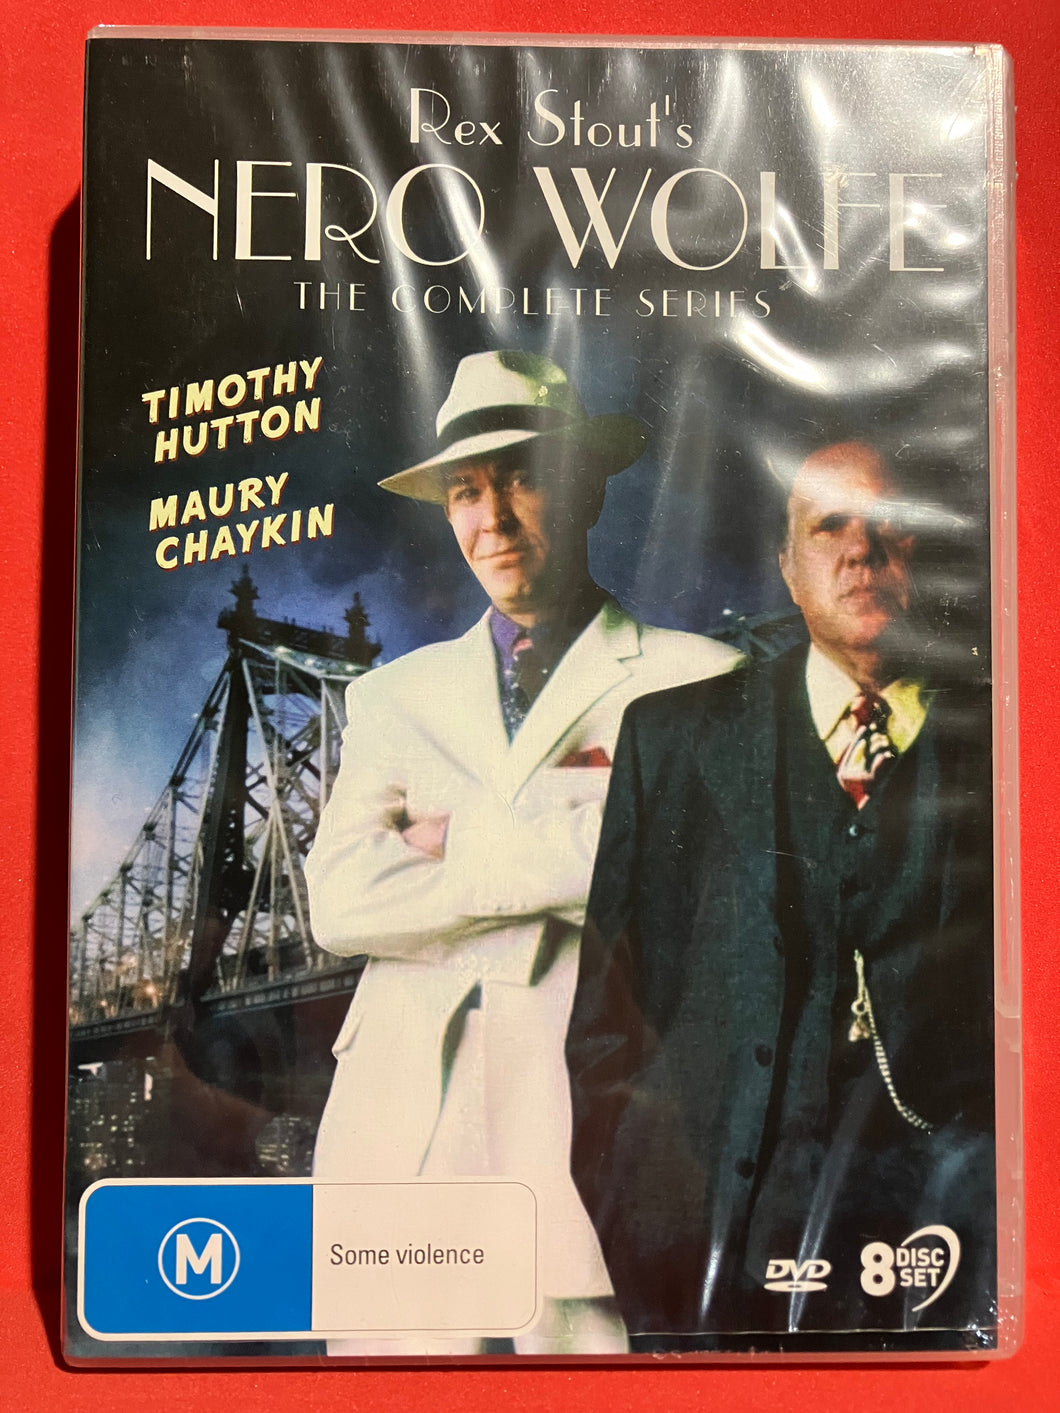 NERO WOLFE - COMPLETE SERIES - DVD (SEALED)